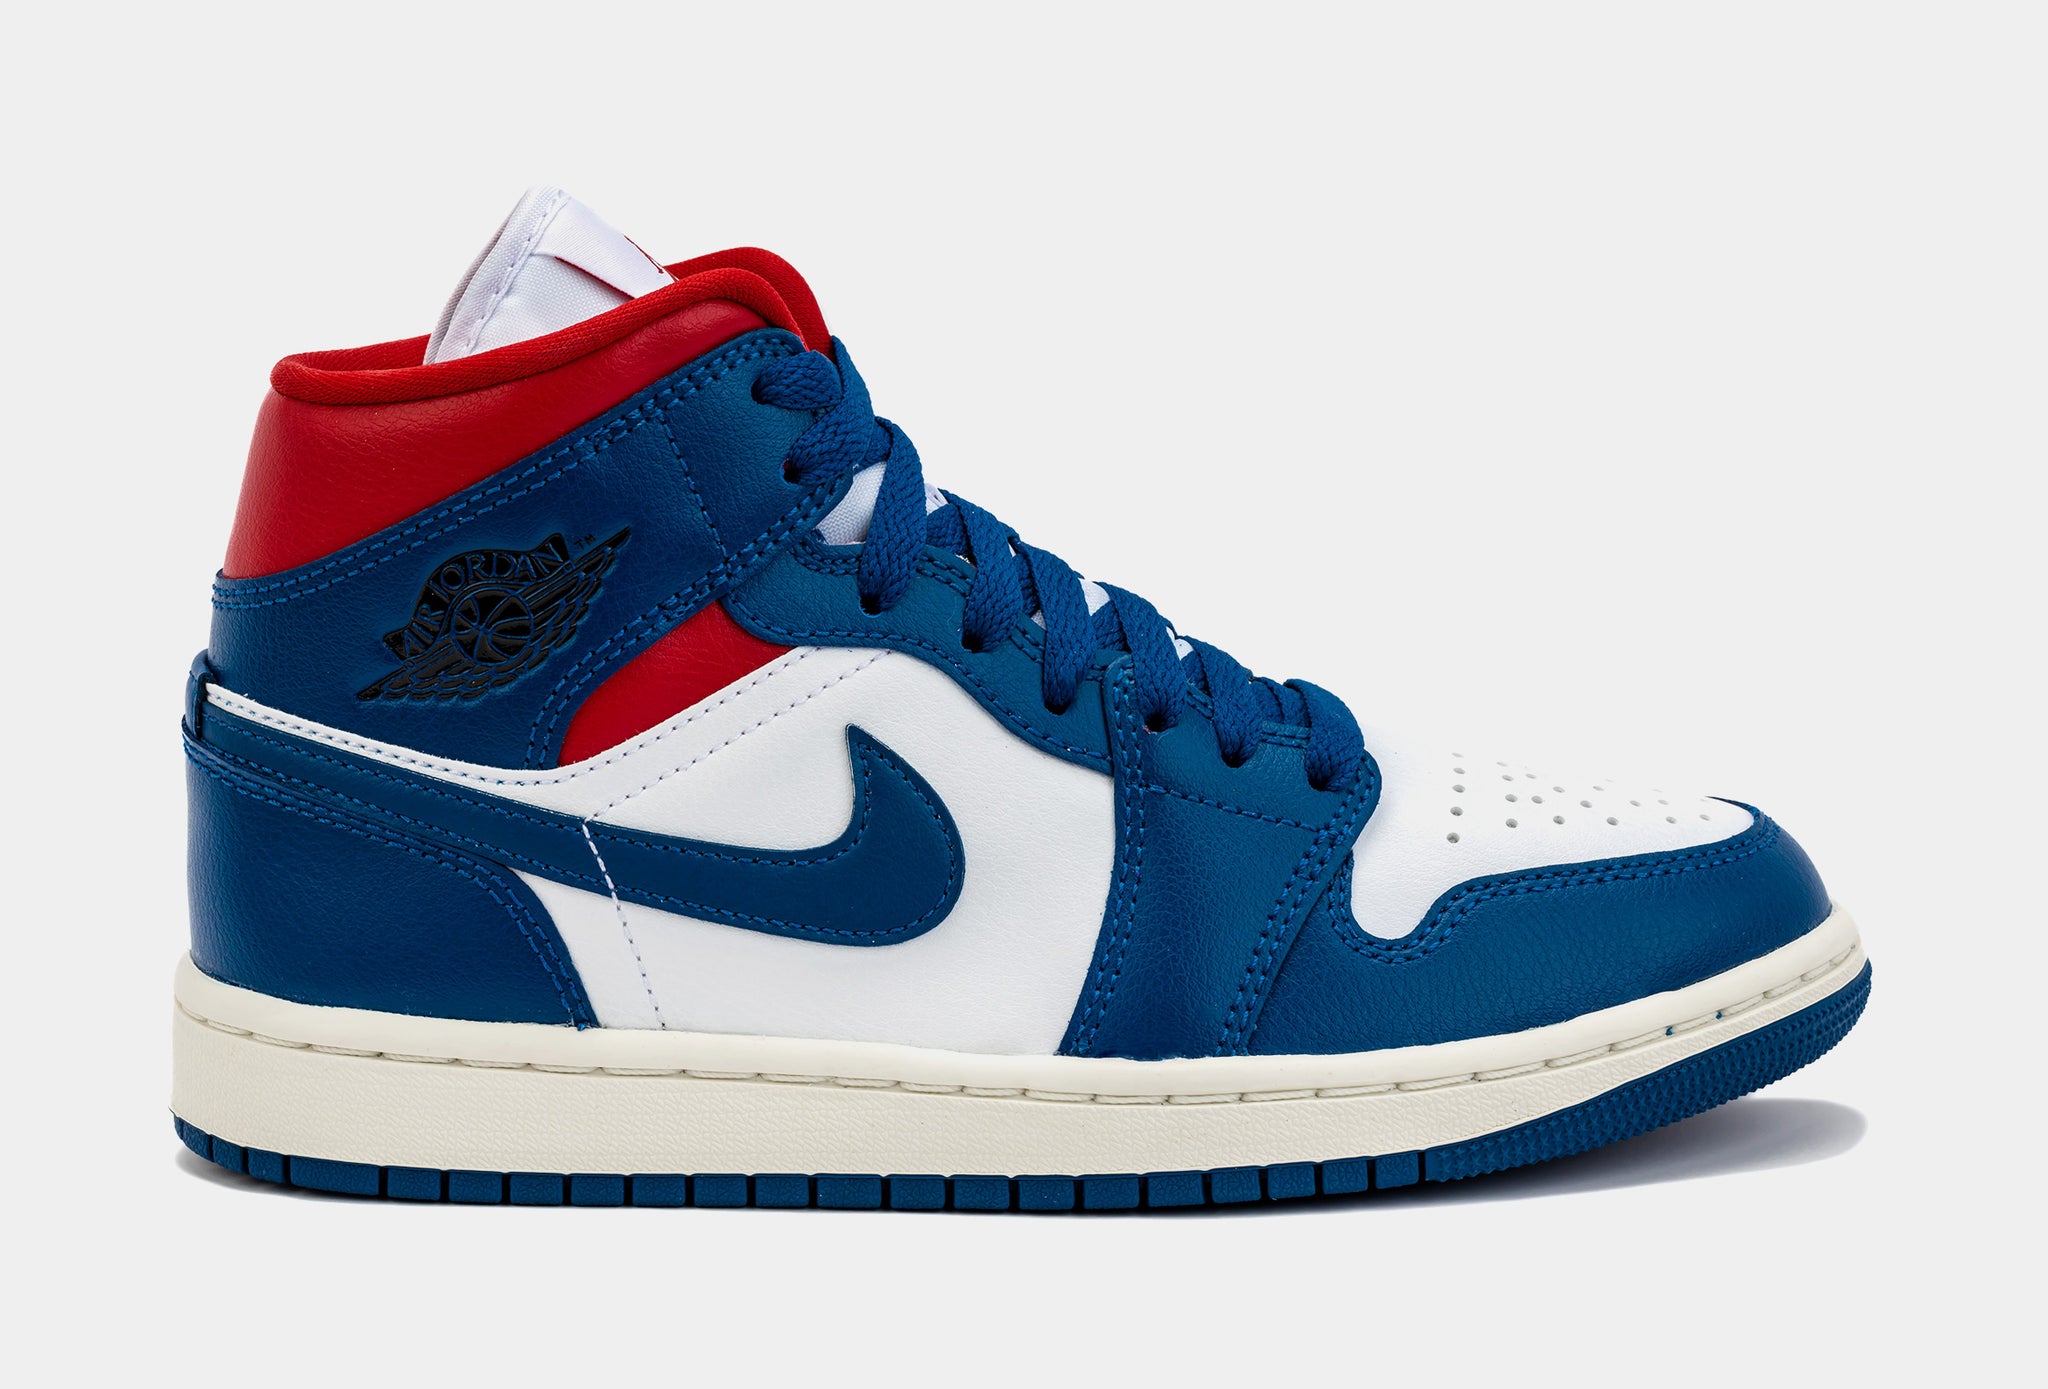 Air Jordan 1 Retro Mid French Blue Womens Lifestyle Shoes (Navy/Red)